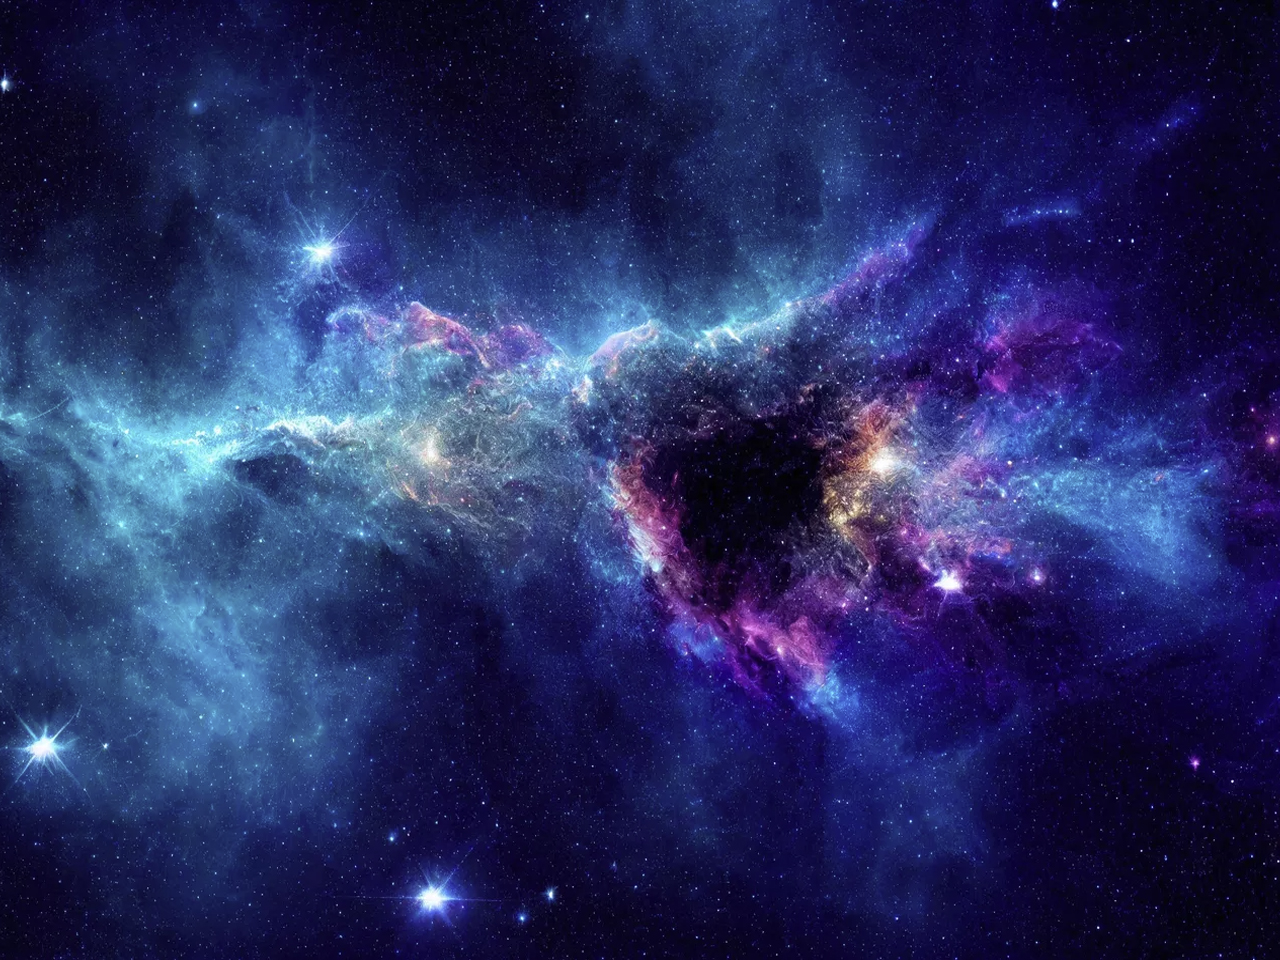 British astronomers have discovered the largest cosmic explosion in history